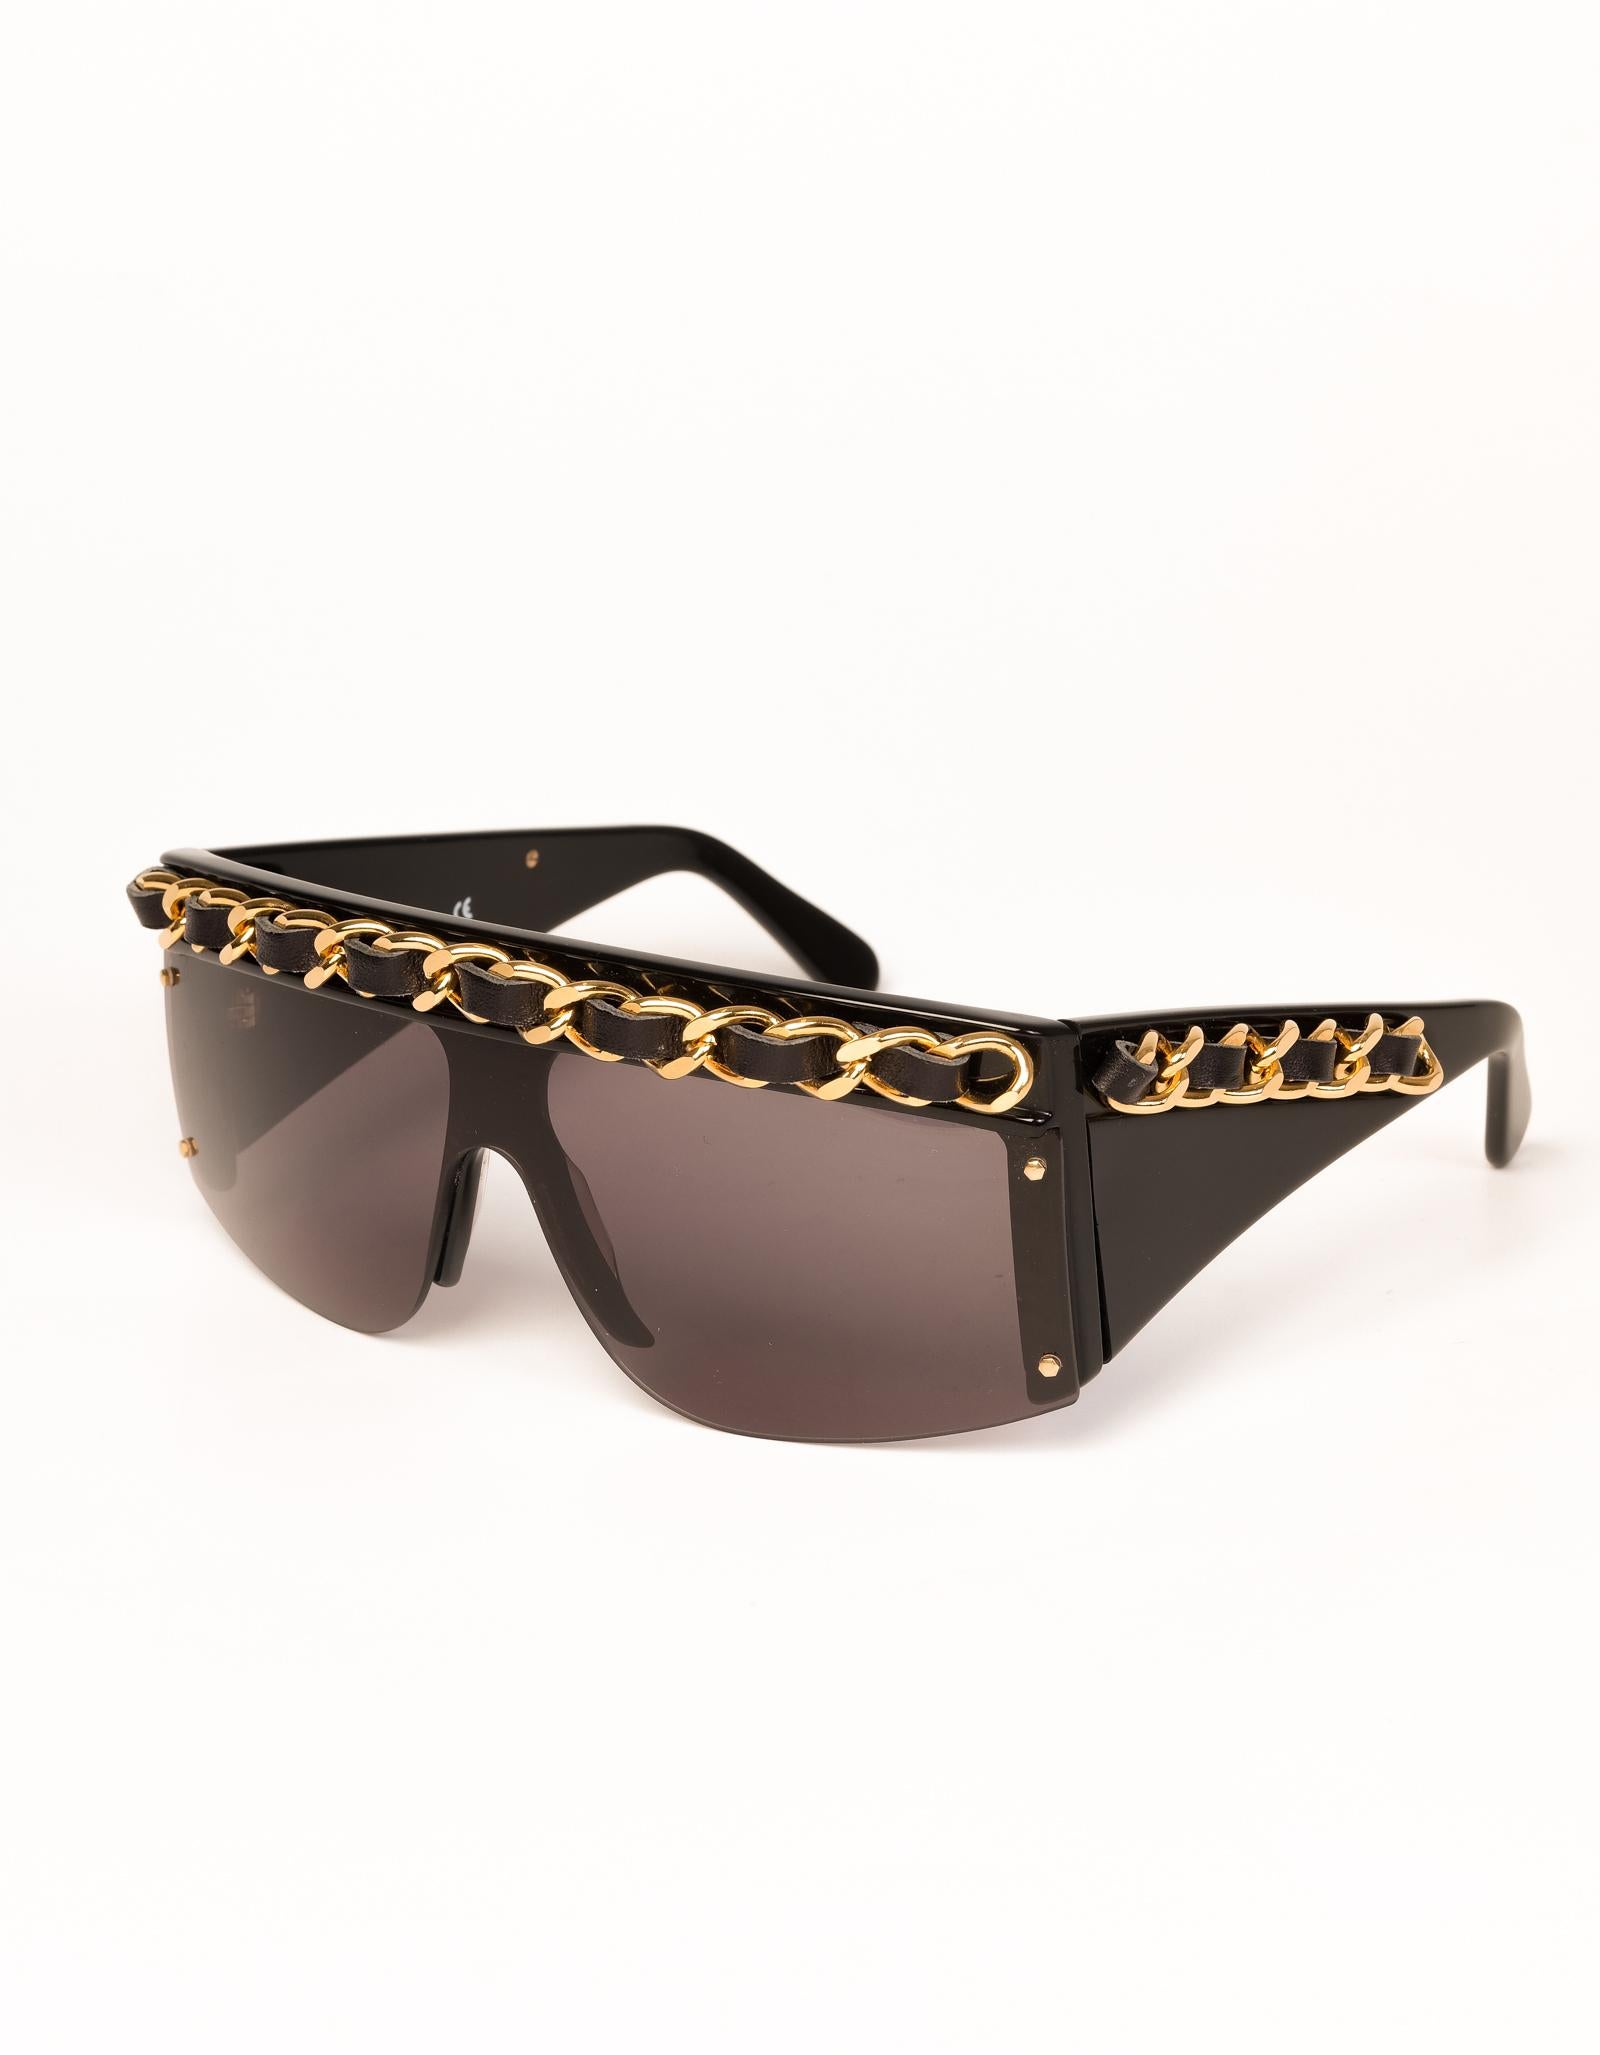 CHANEL CC CHAIN SUNGLASSES 01455 94305

COLOR: Black
ITEM CODE: 01455 94305
FRAME MATERIAL: Acetate (plastic)

MEASUREMENTS~
Arms: 120mm
Lens width: 70mm
Lens height: 60mm
Bridge: 17mm

COMES WITH: Sunglass case

Made in Italy
100% UV